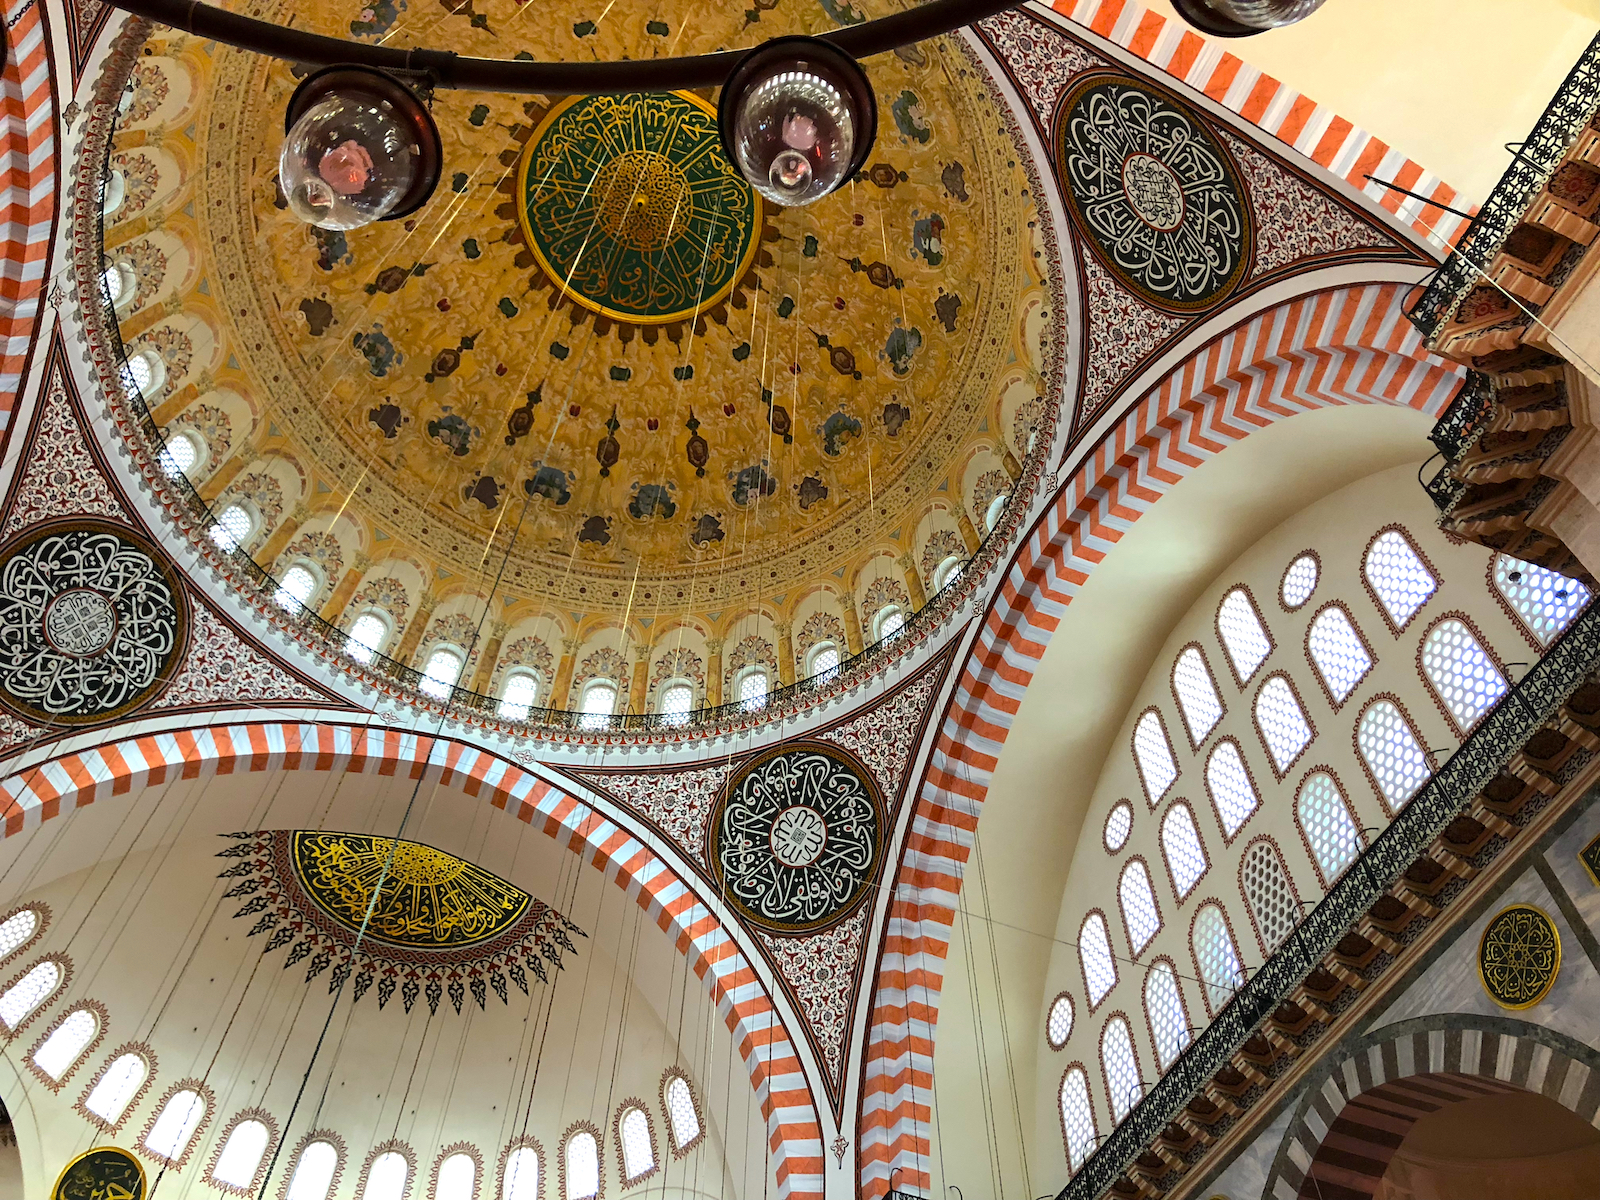 Süleymaniye Mosque - Top 11 Things to Do In Istanbul